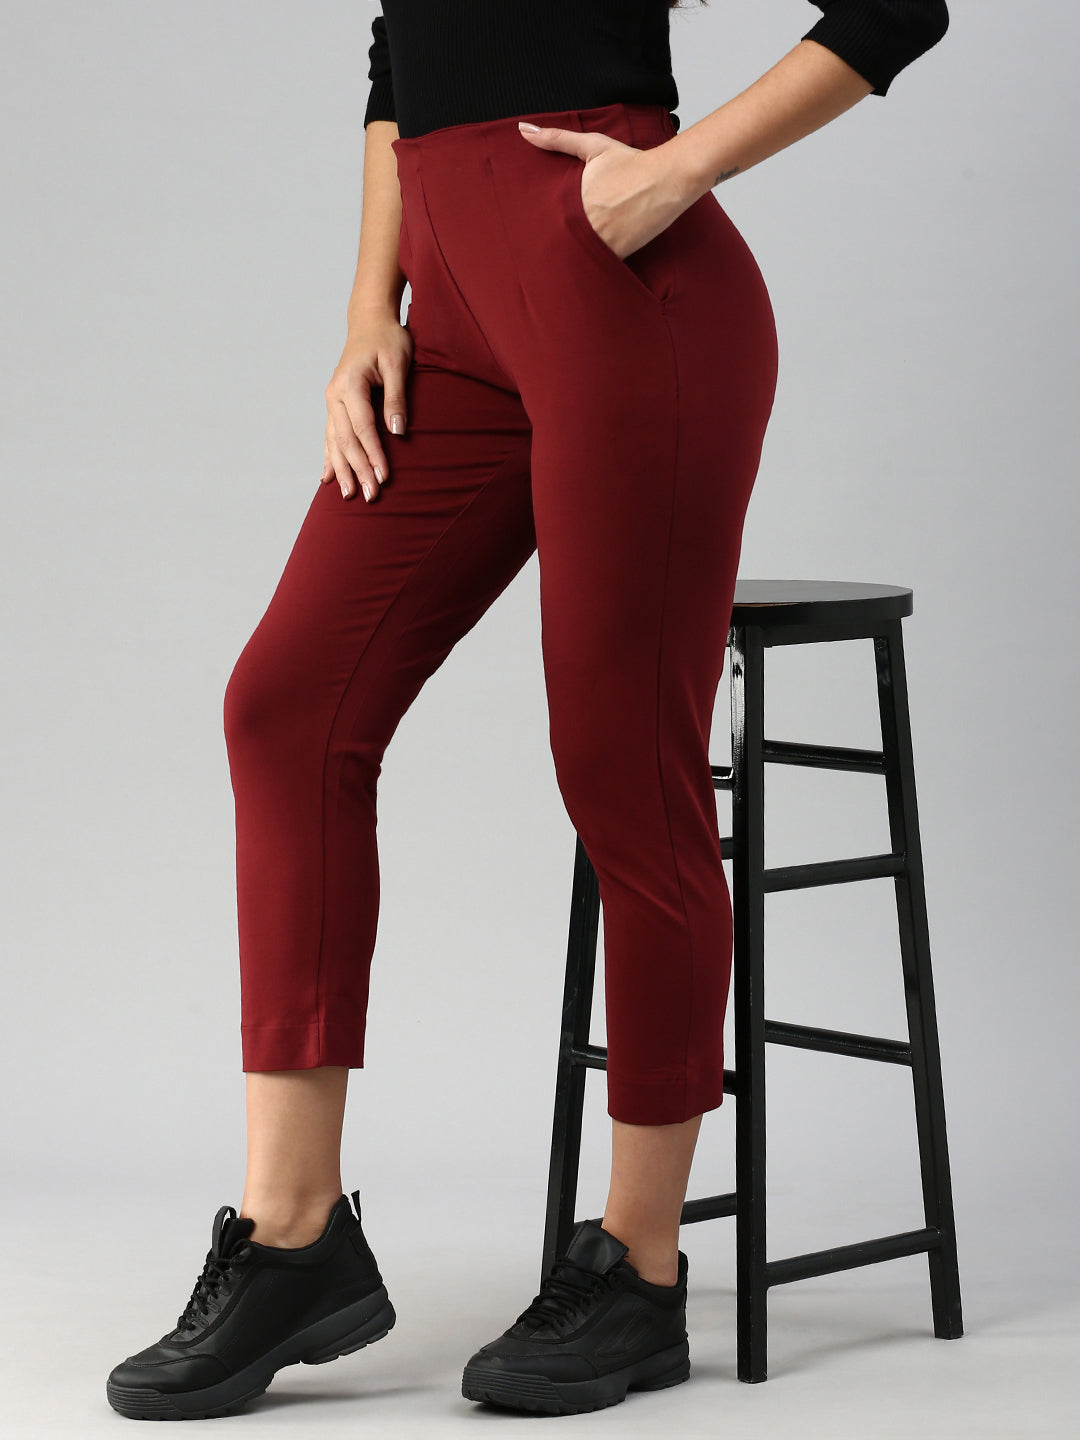 Glossia Fashion Maroon Formal Tapered Cigarette Trousers for Women - 82650